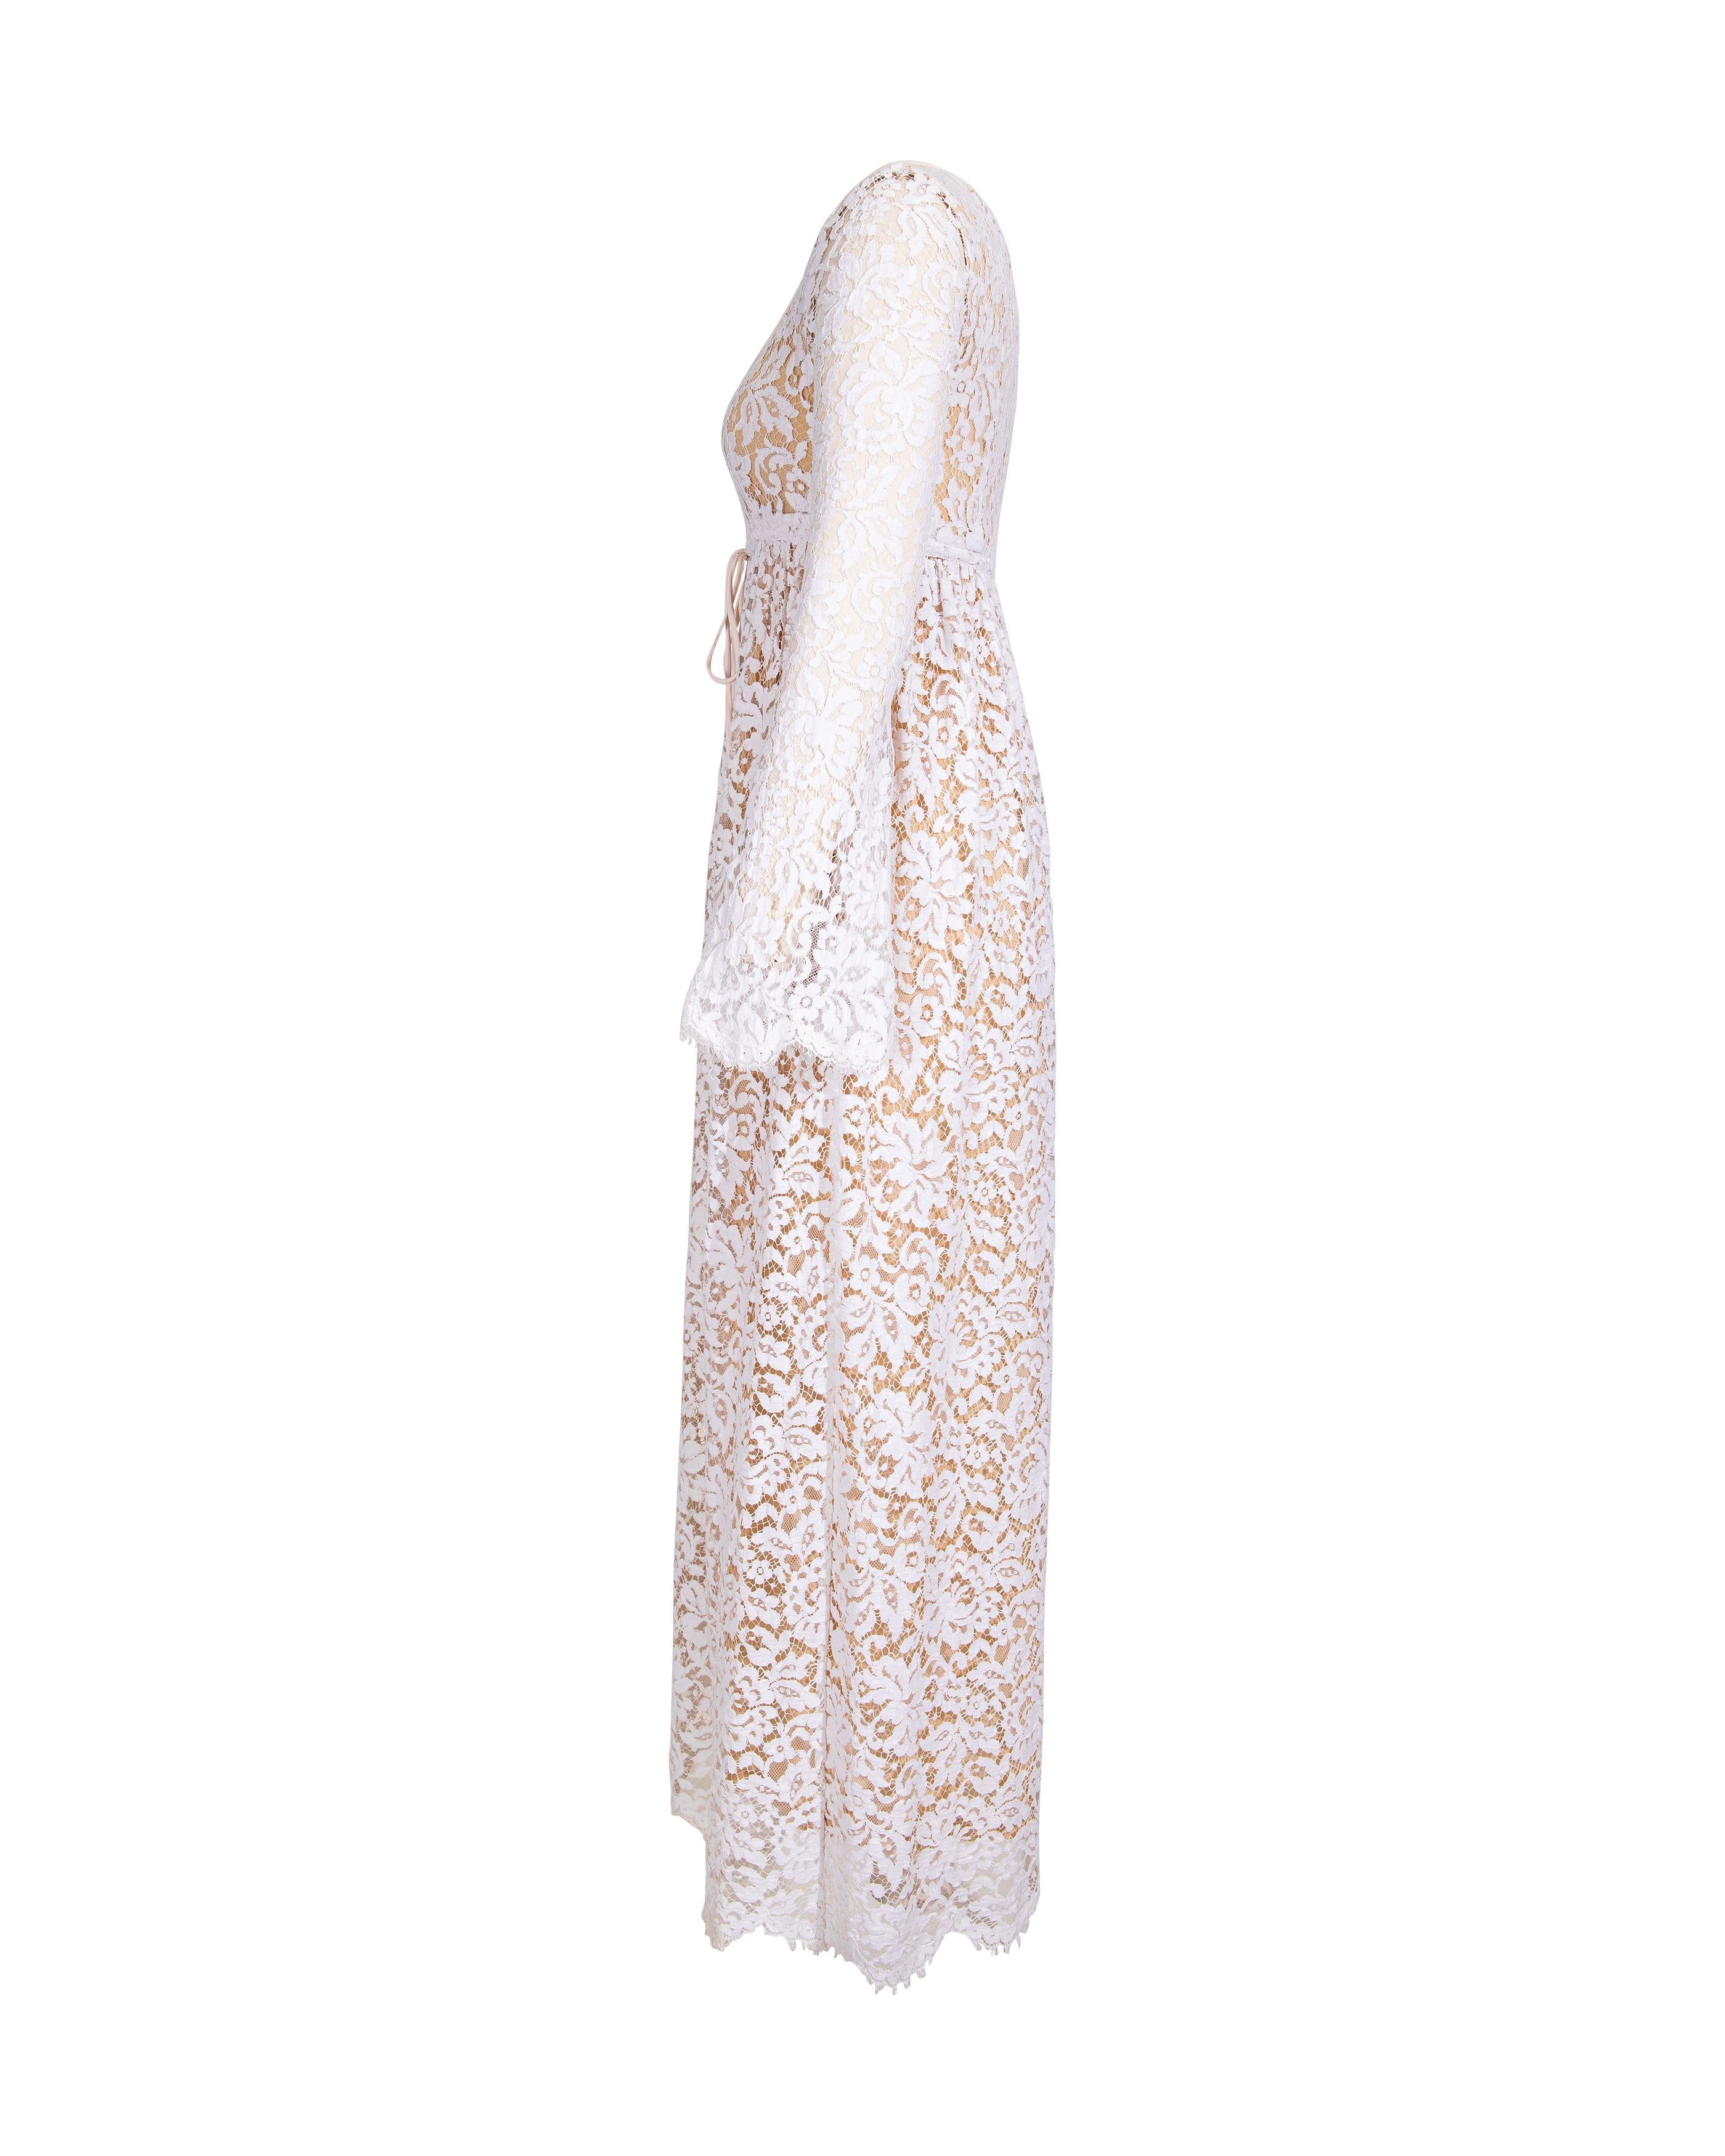 Women's S/S 1996 Gucci by Tom Ford White Lace Gown with Nude Lining